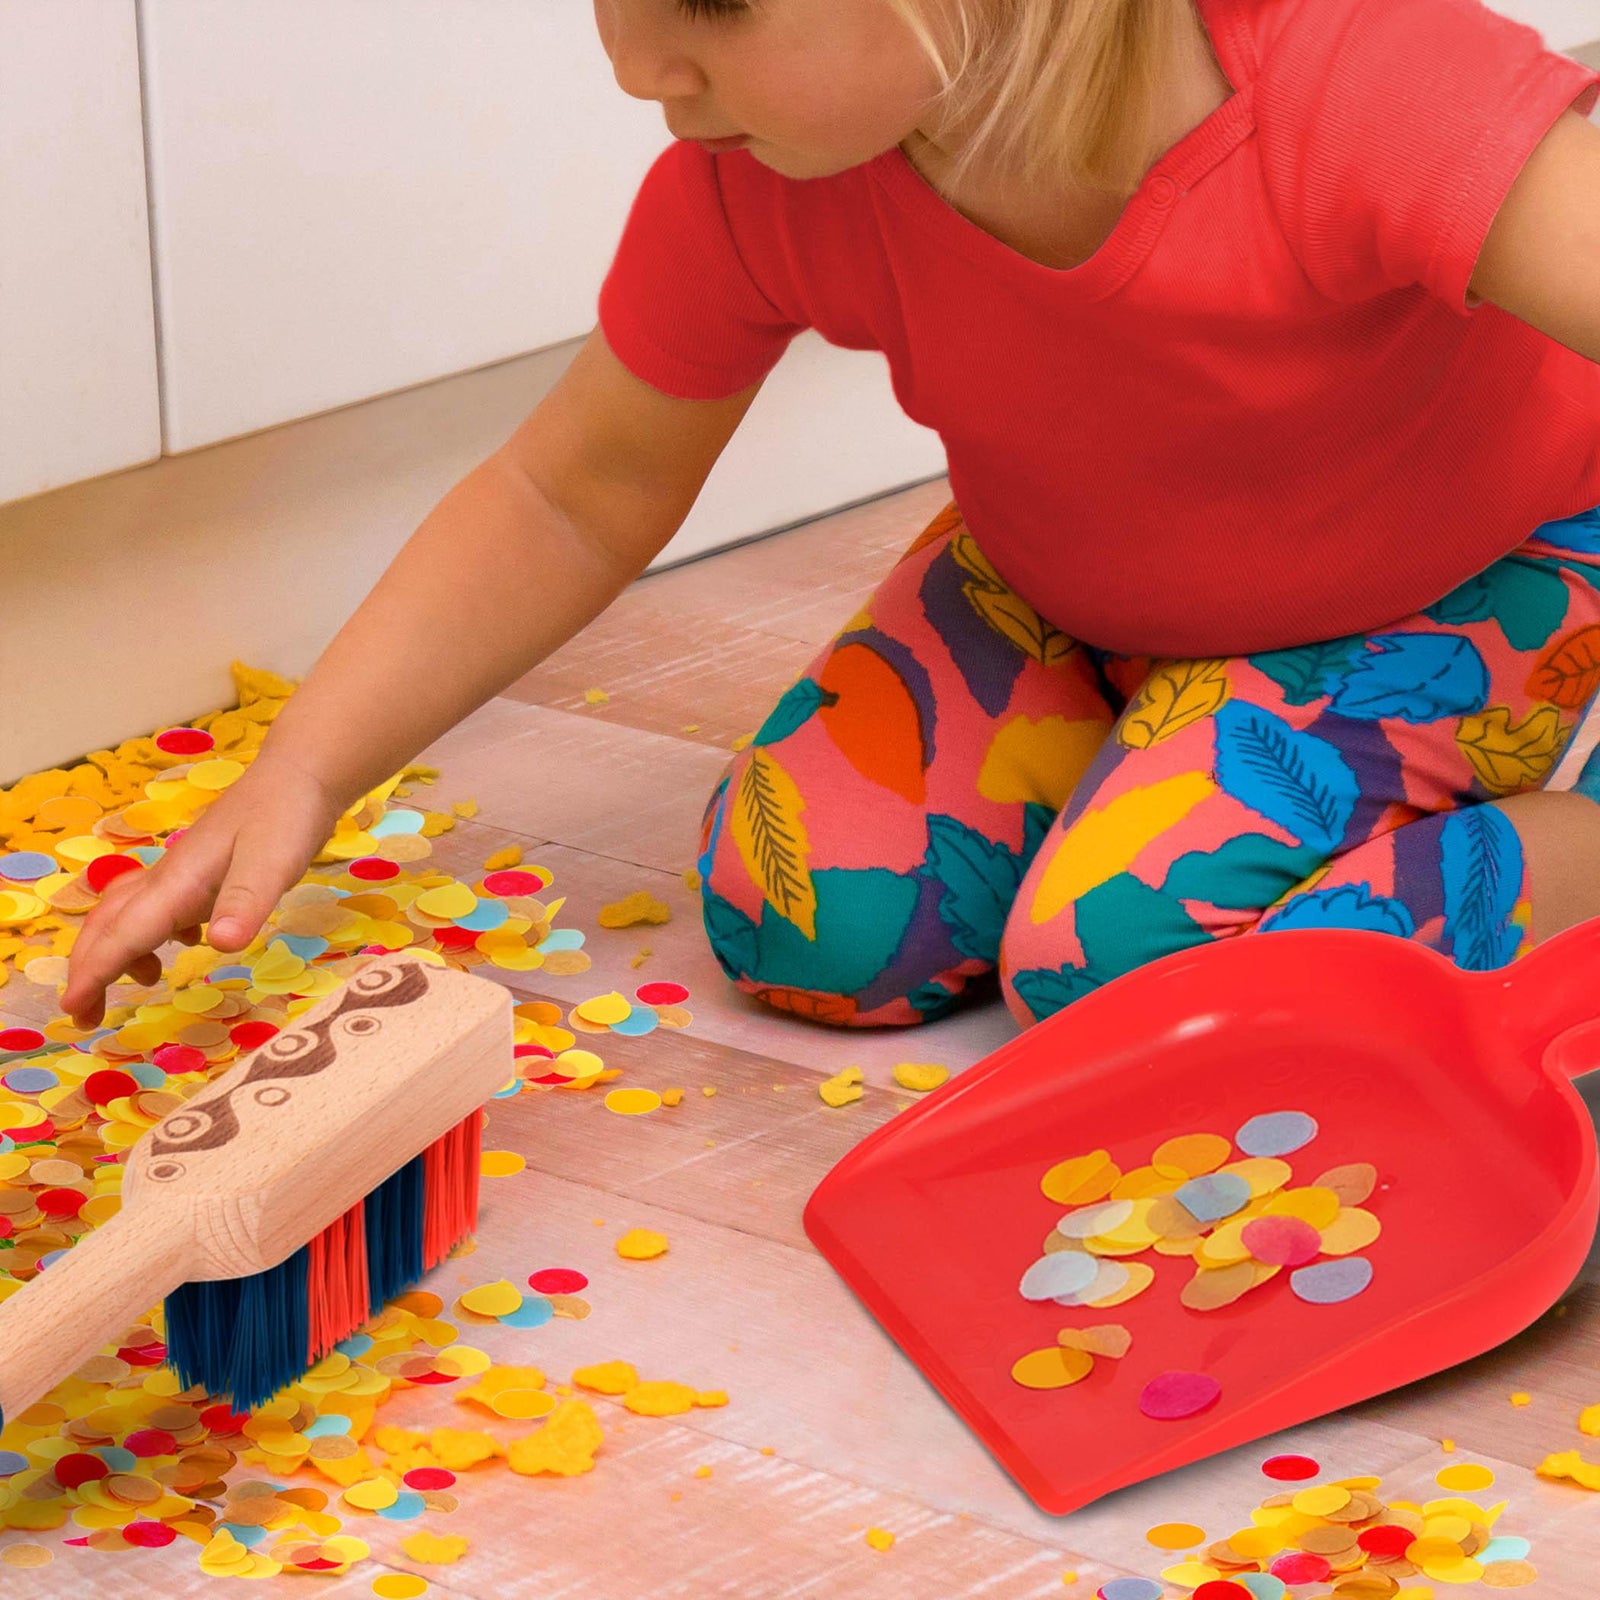 B.Toys: Clean'n'Play cleaning kit